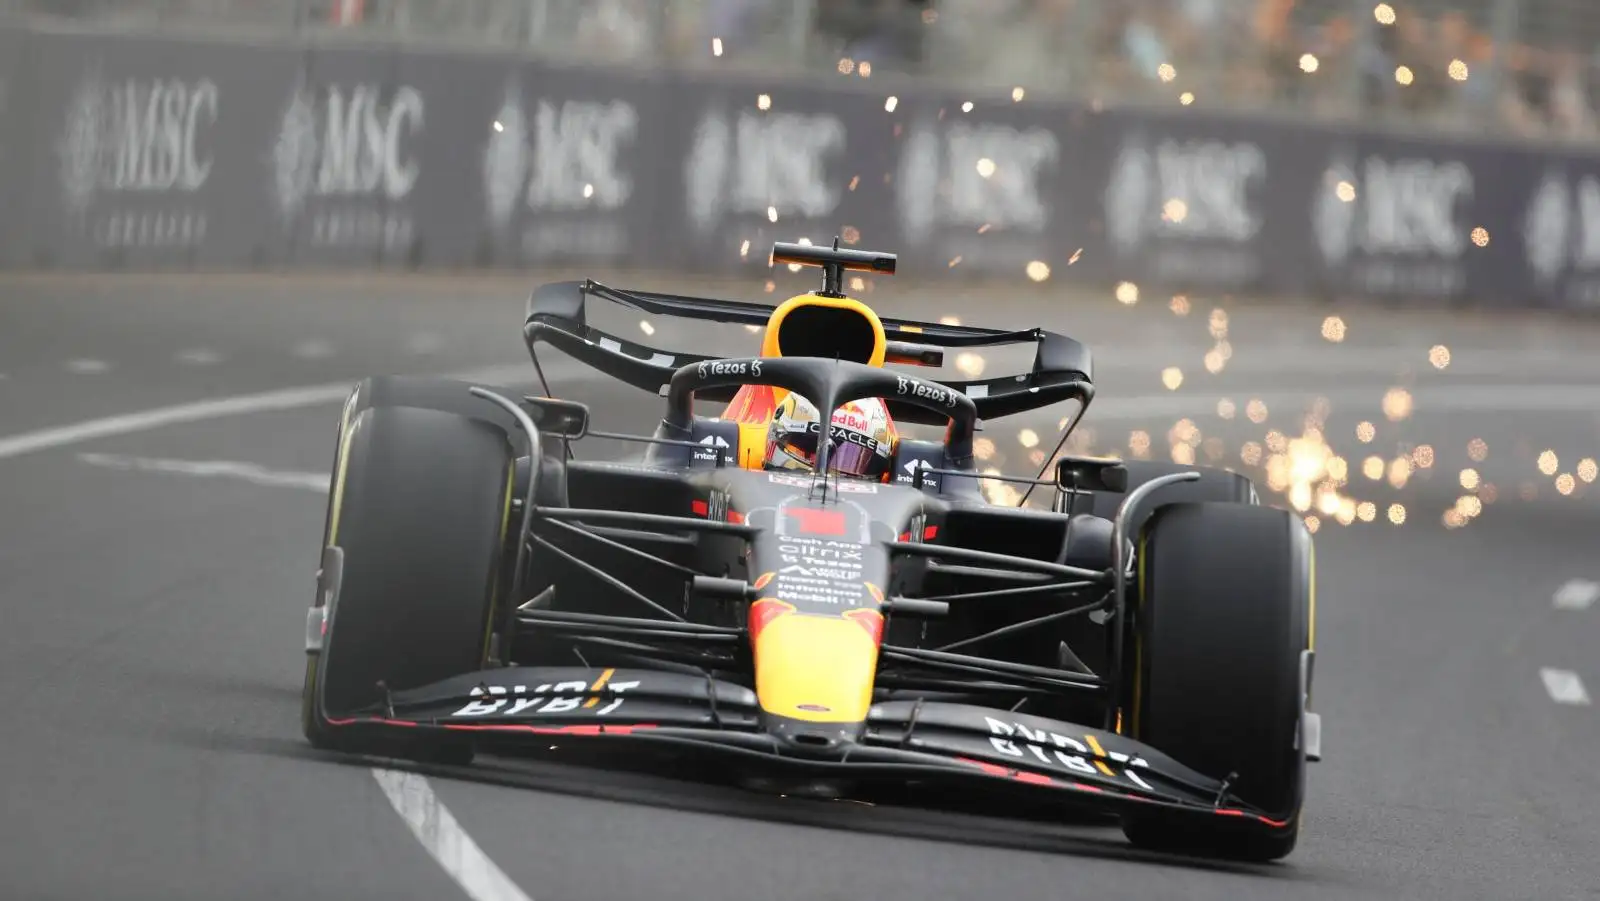 Max Verstappen's Red Bull during free practice for the Australian GP. Melbourne April 2022.